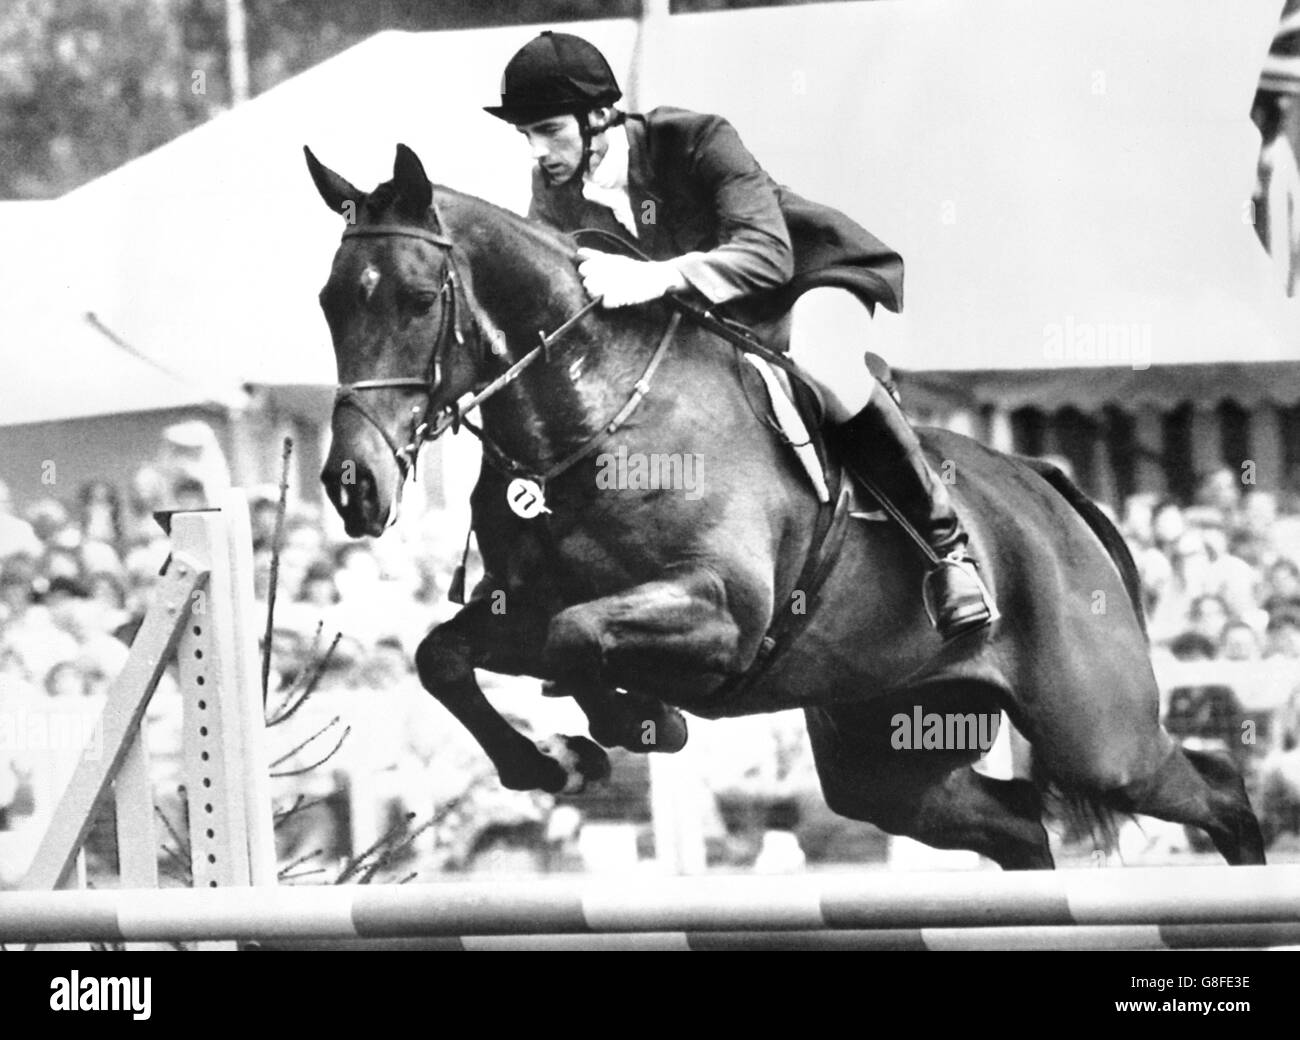 Ian Stark, 34, from Selkirk, Scotland, aboard 'Sir Wattie' on his way to becoming the first rider to take the first two places in the Whitbread Trophy at Badminton. Start added a second place on 'Glenburnie'. Stock Photo